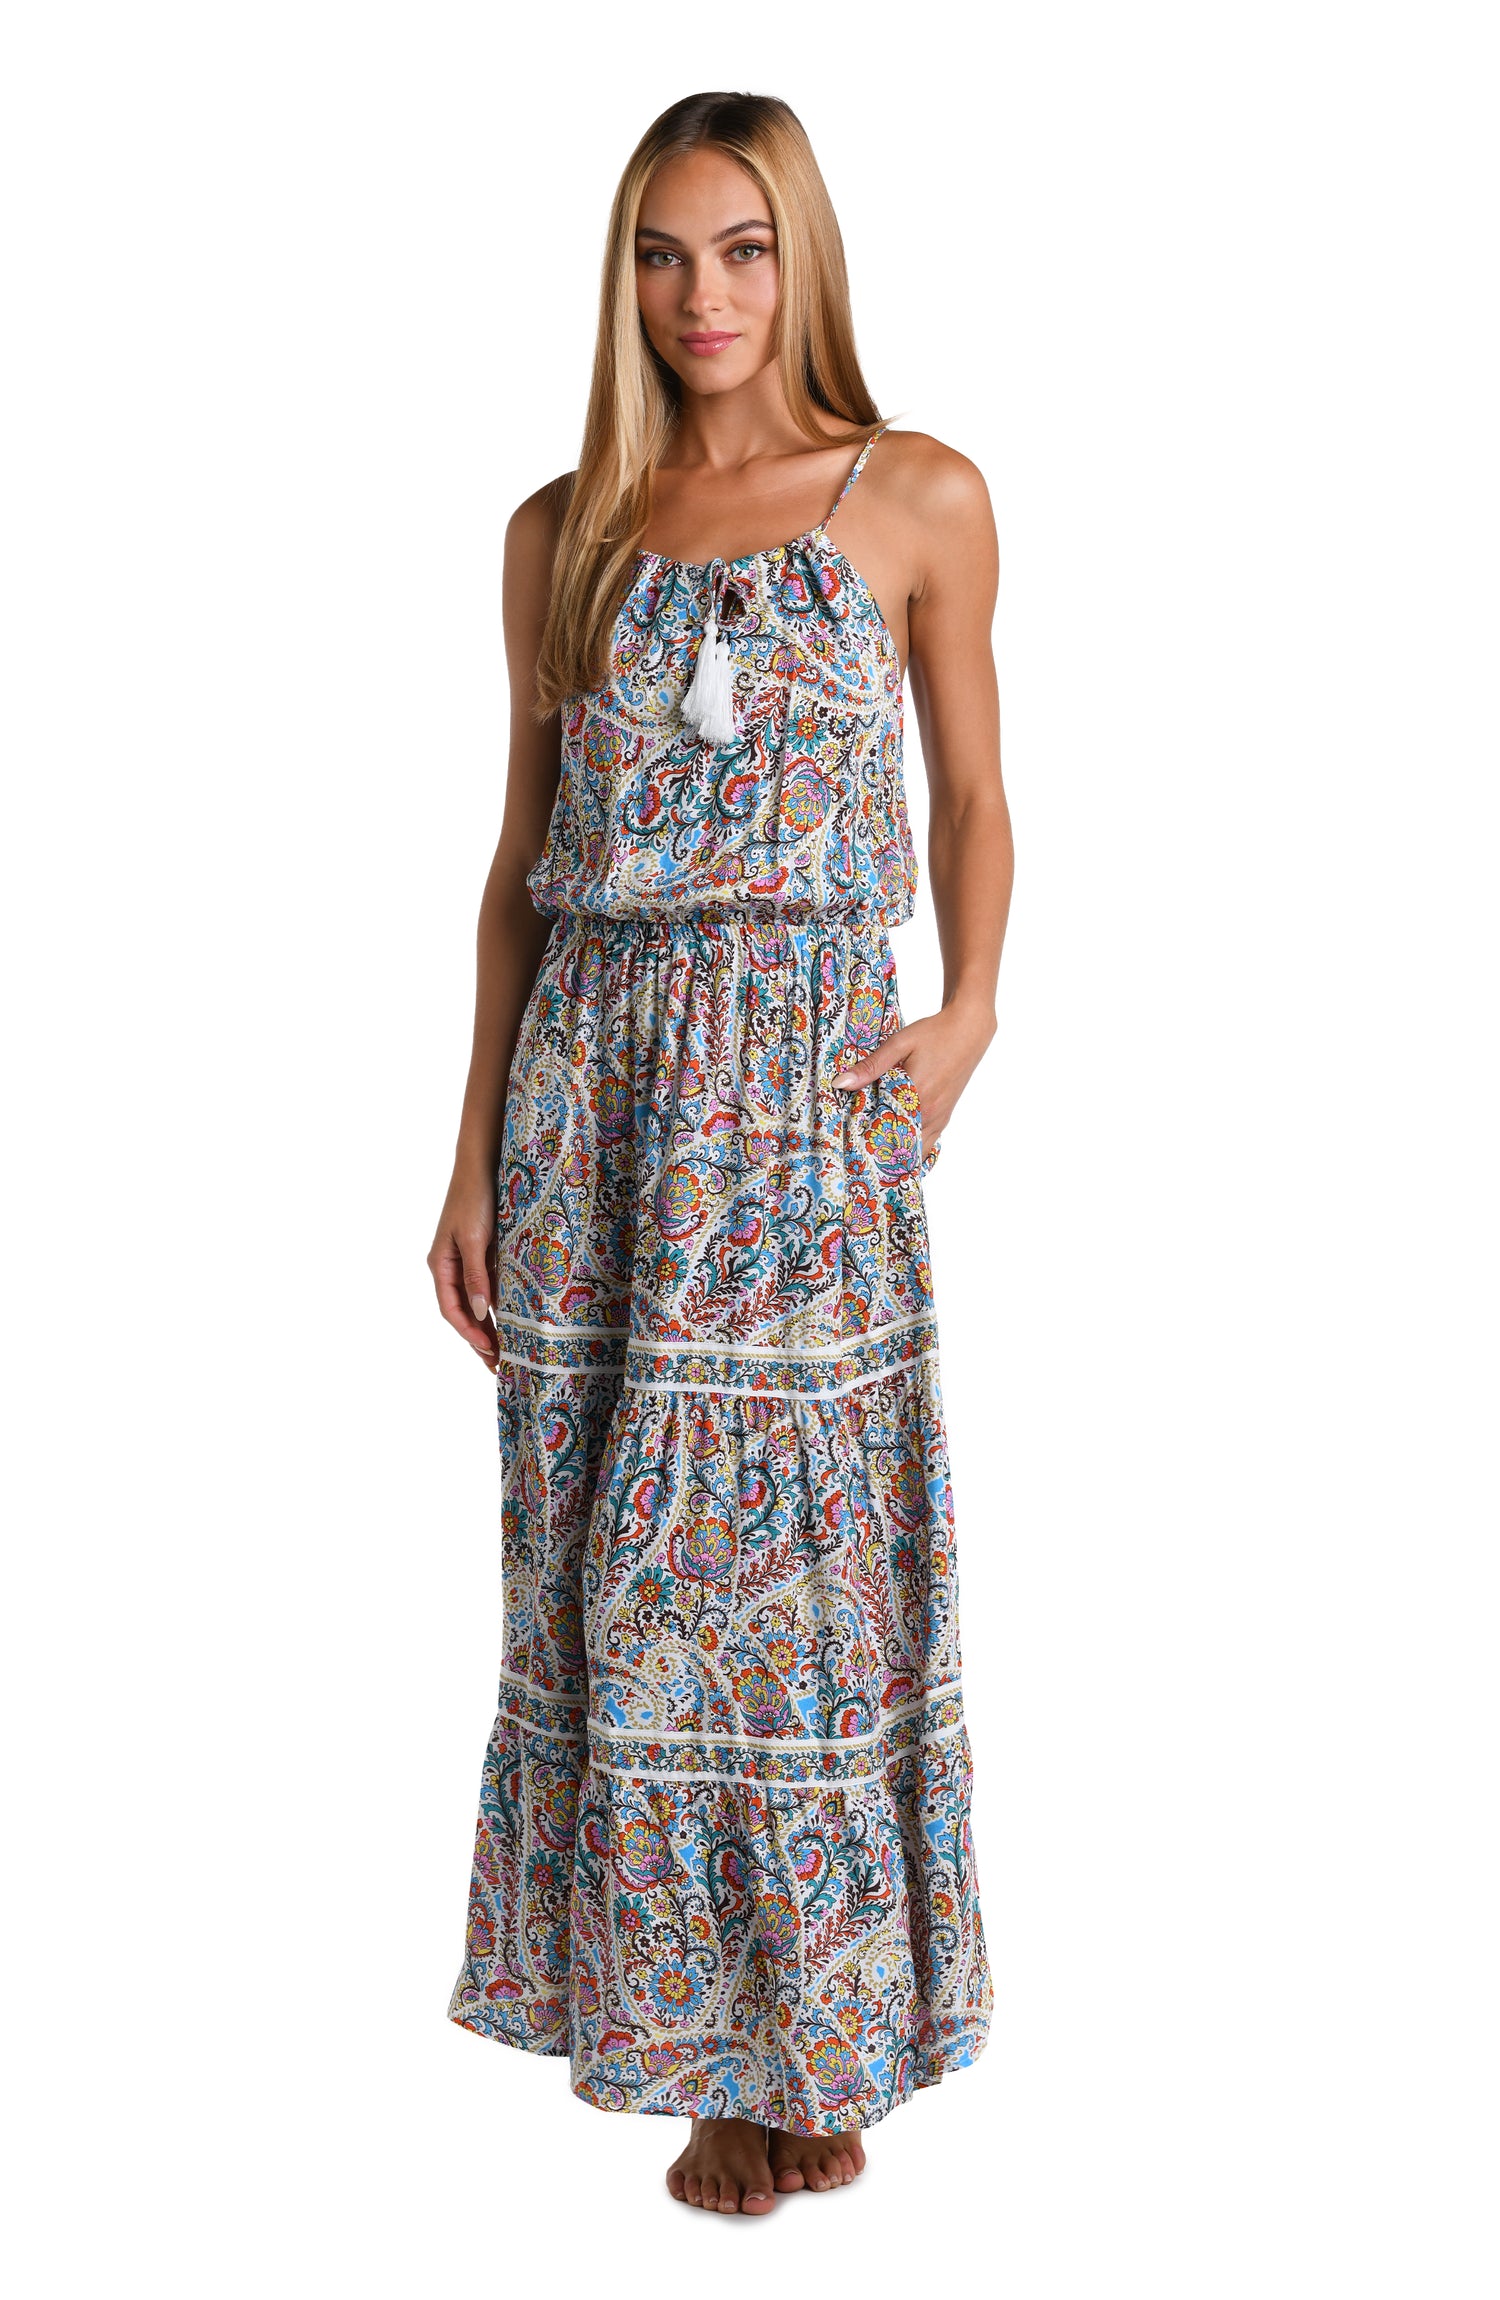 Model is wearing a white, red, blue, green, and yellow multicolored paisley printed Maxi Dress